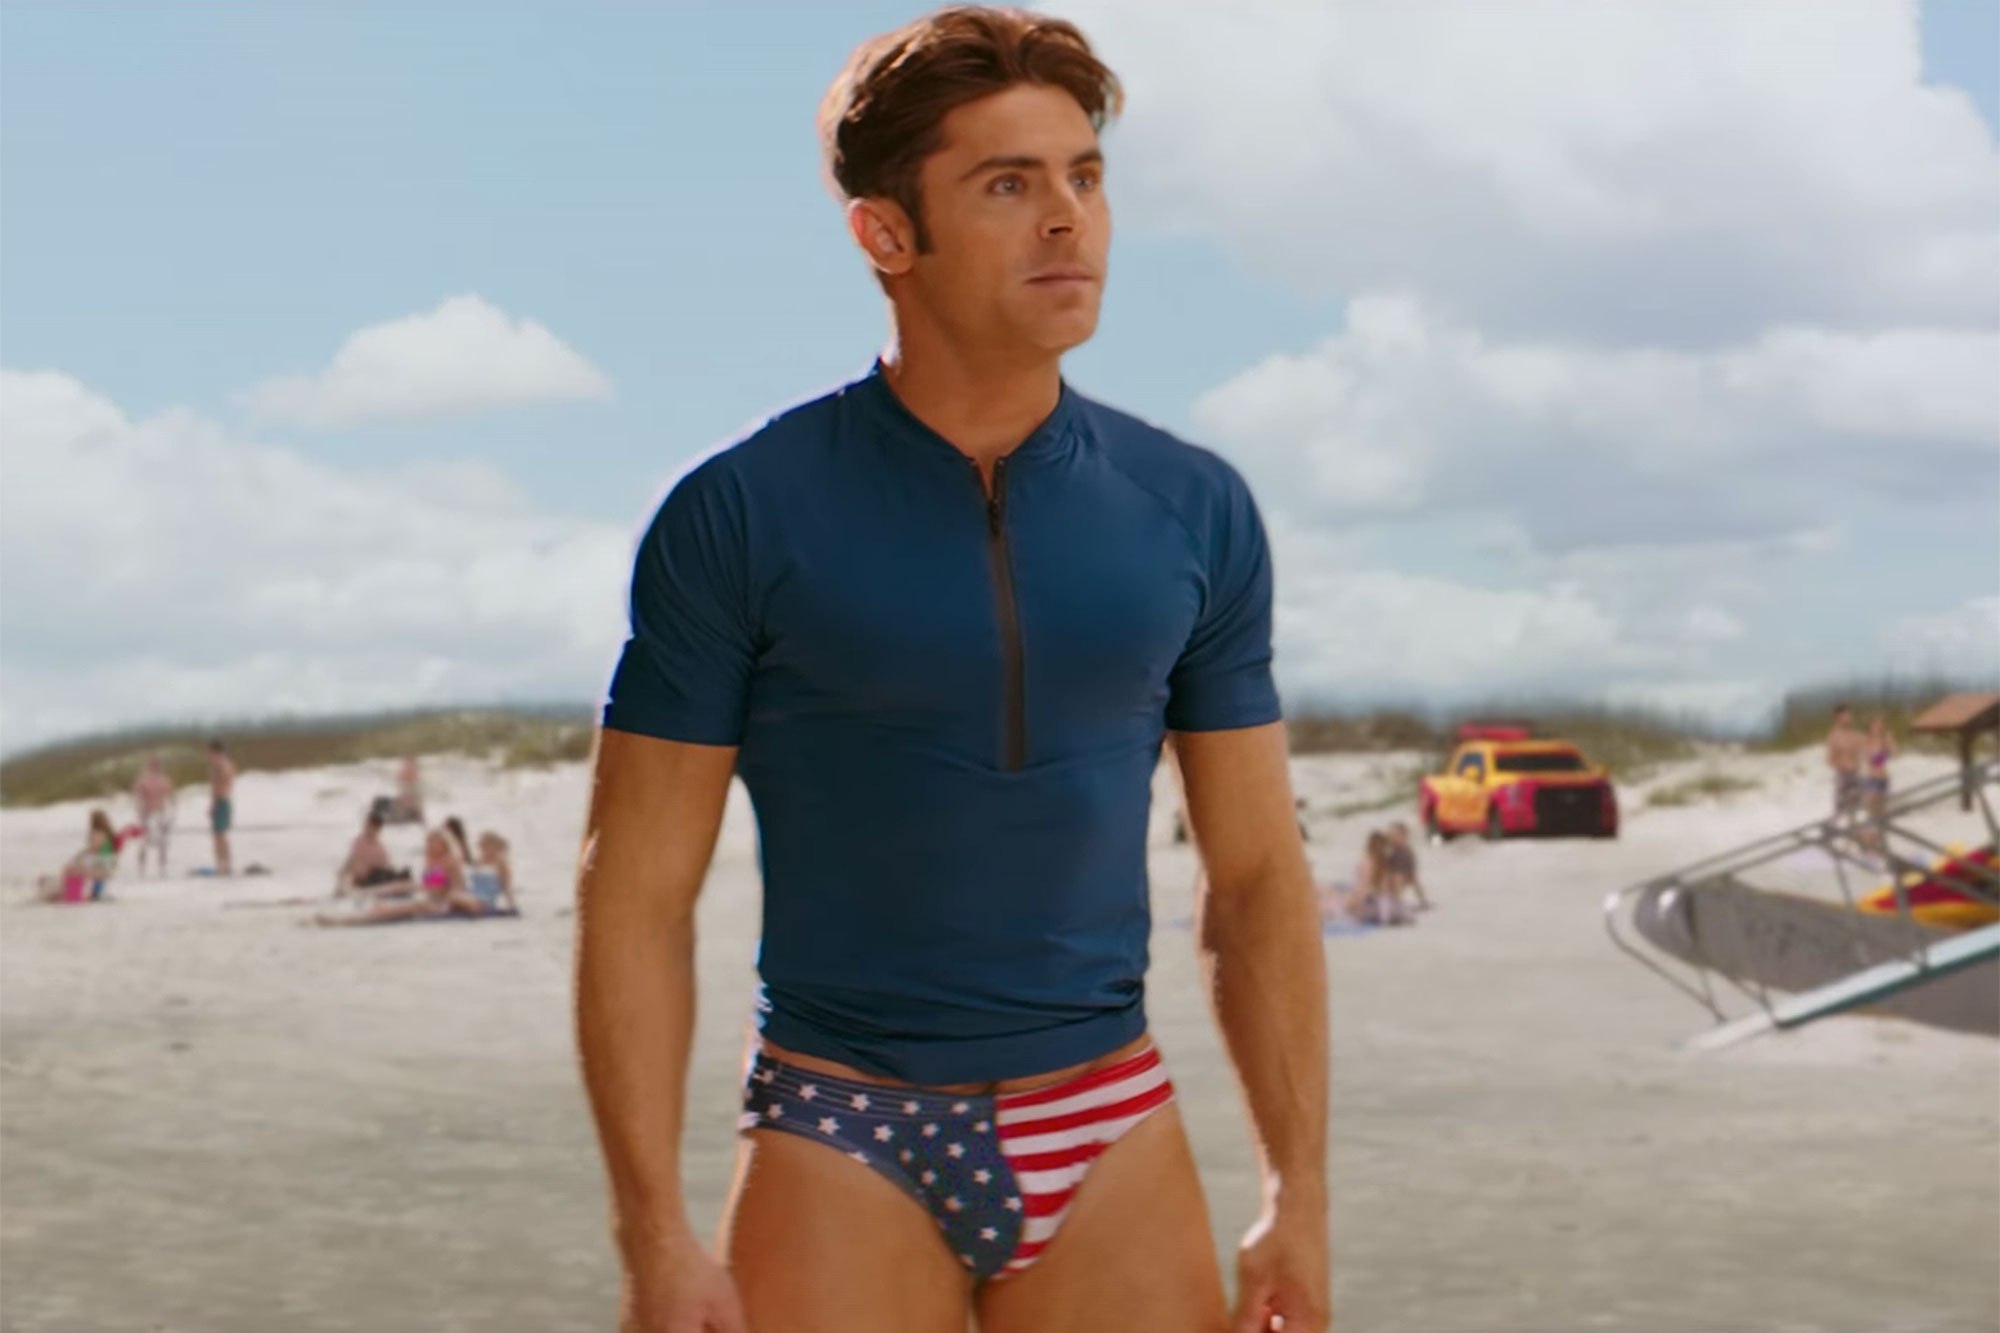 24 Reasons Why Zac Efron And Dwayne Johnson Are Perfect For The New Baywatch Movie